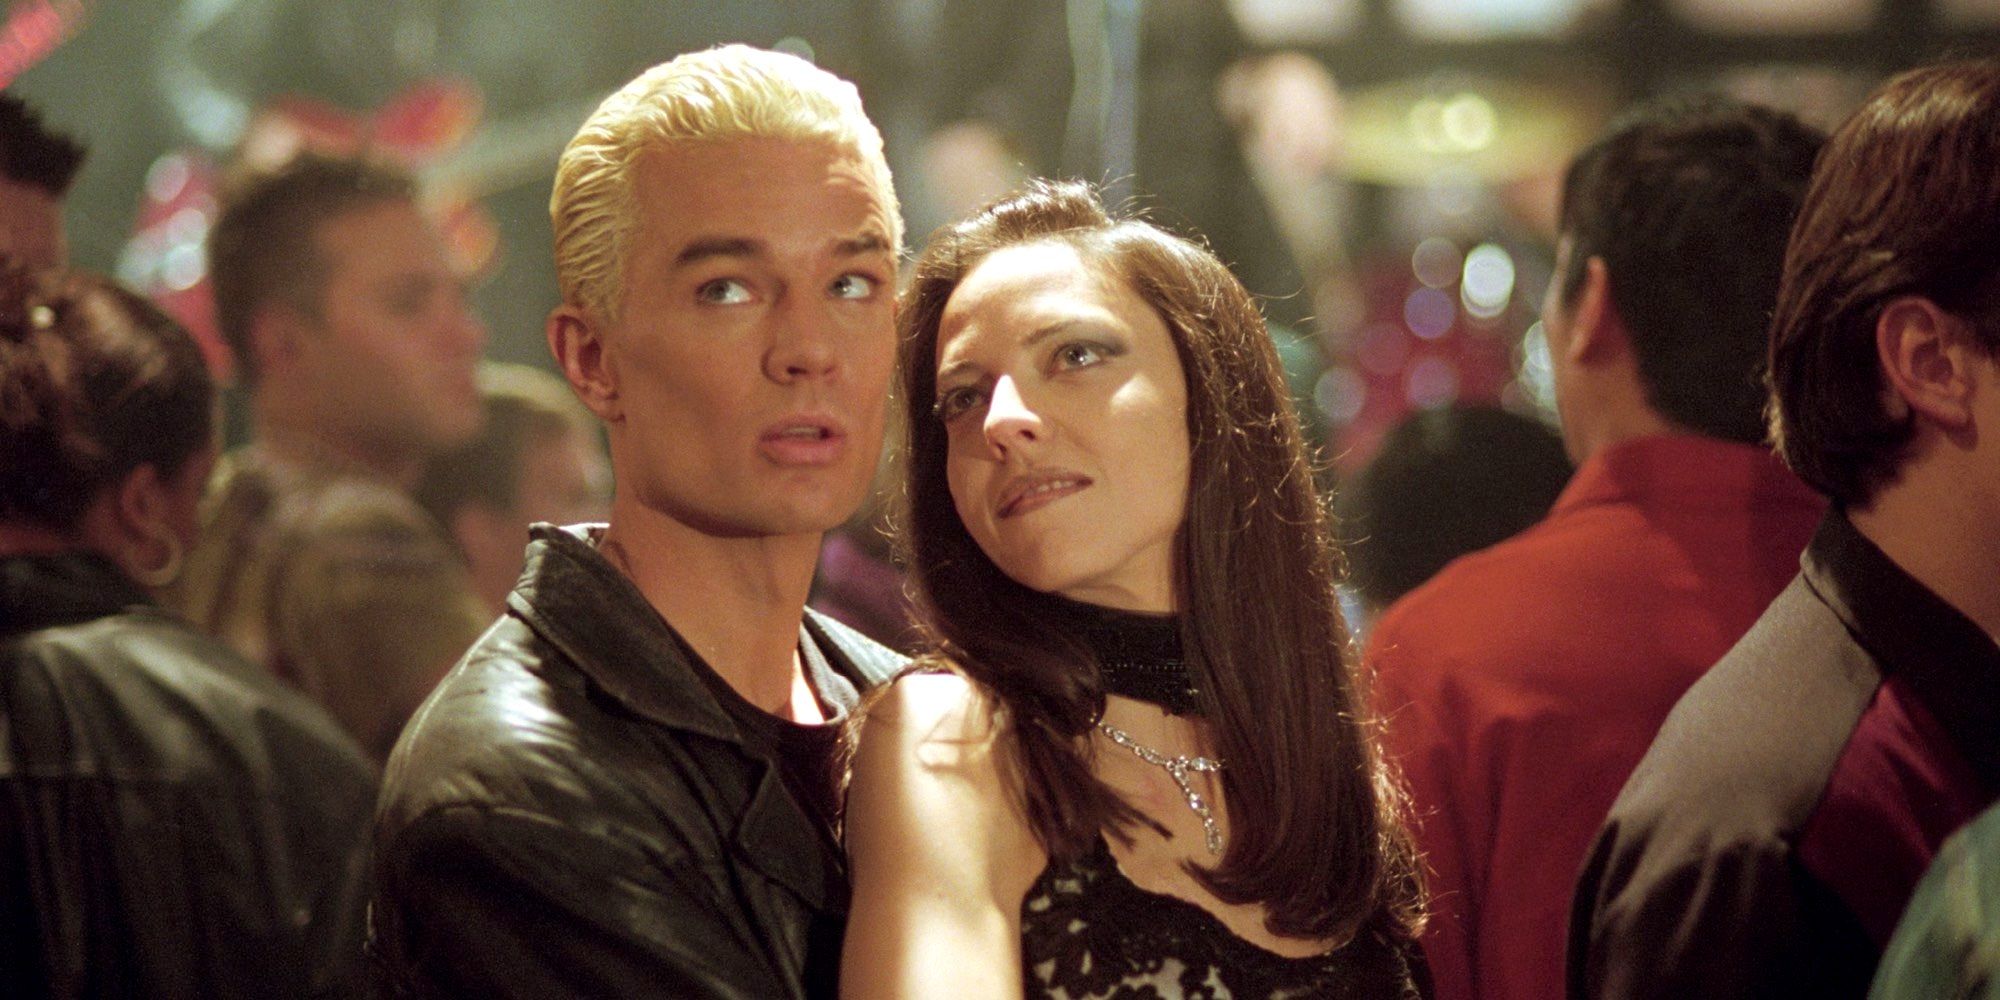 Spike and Drusilla in Buffy the Vampire Slayer